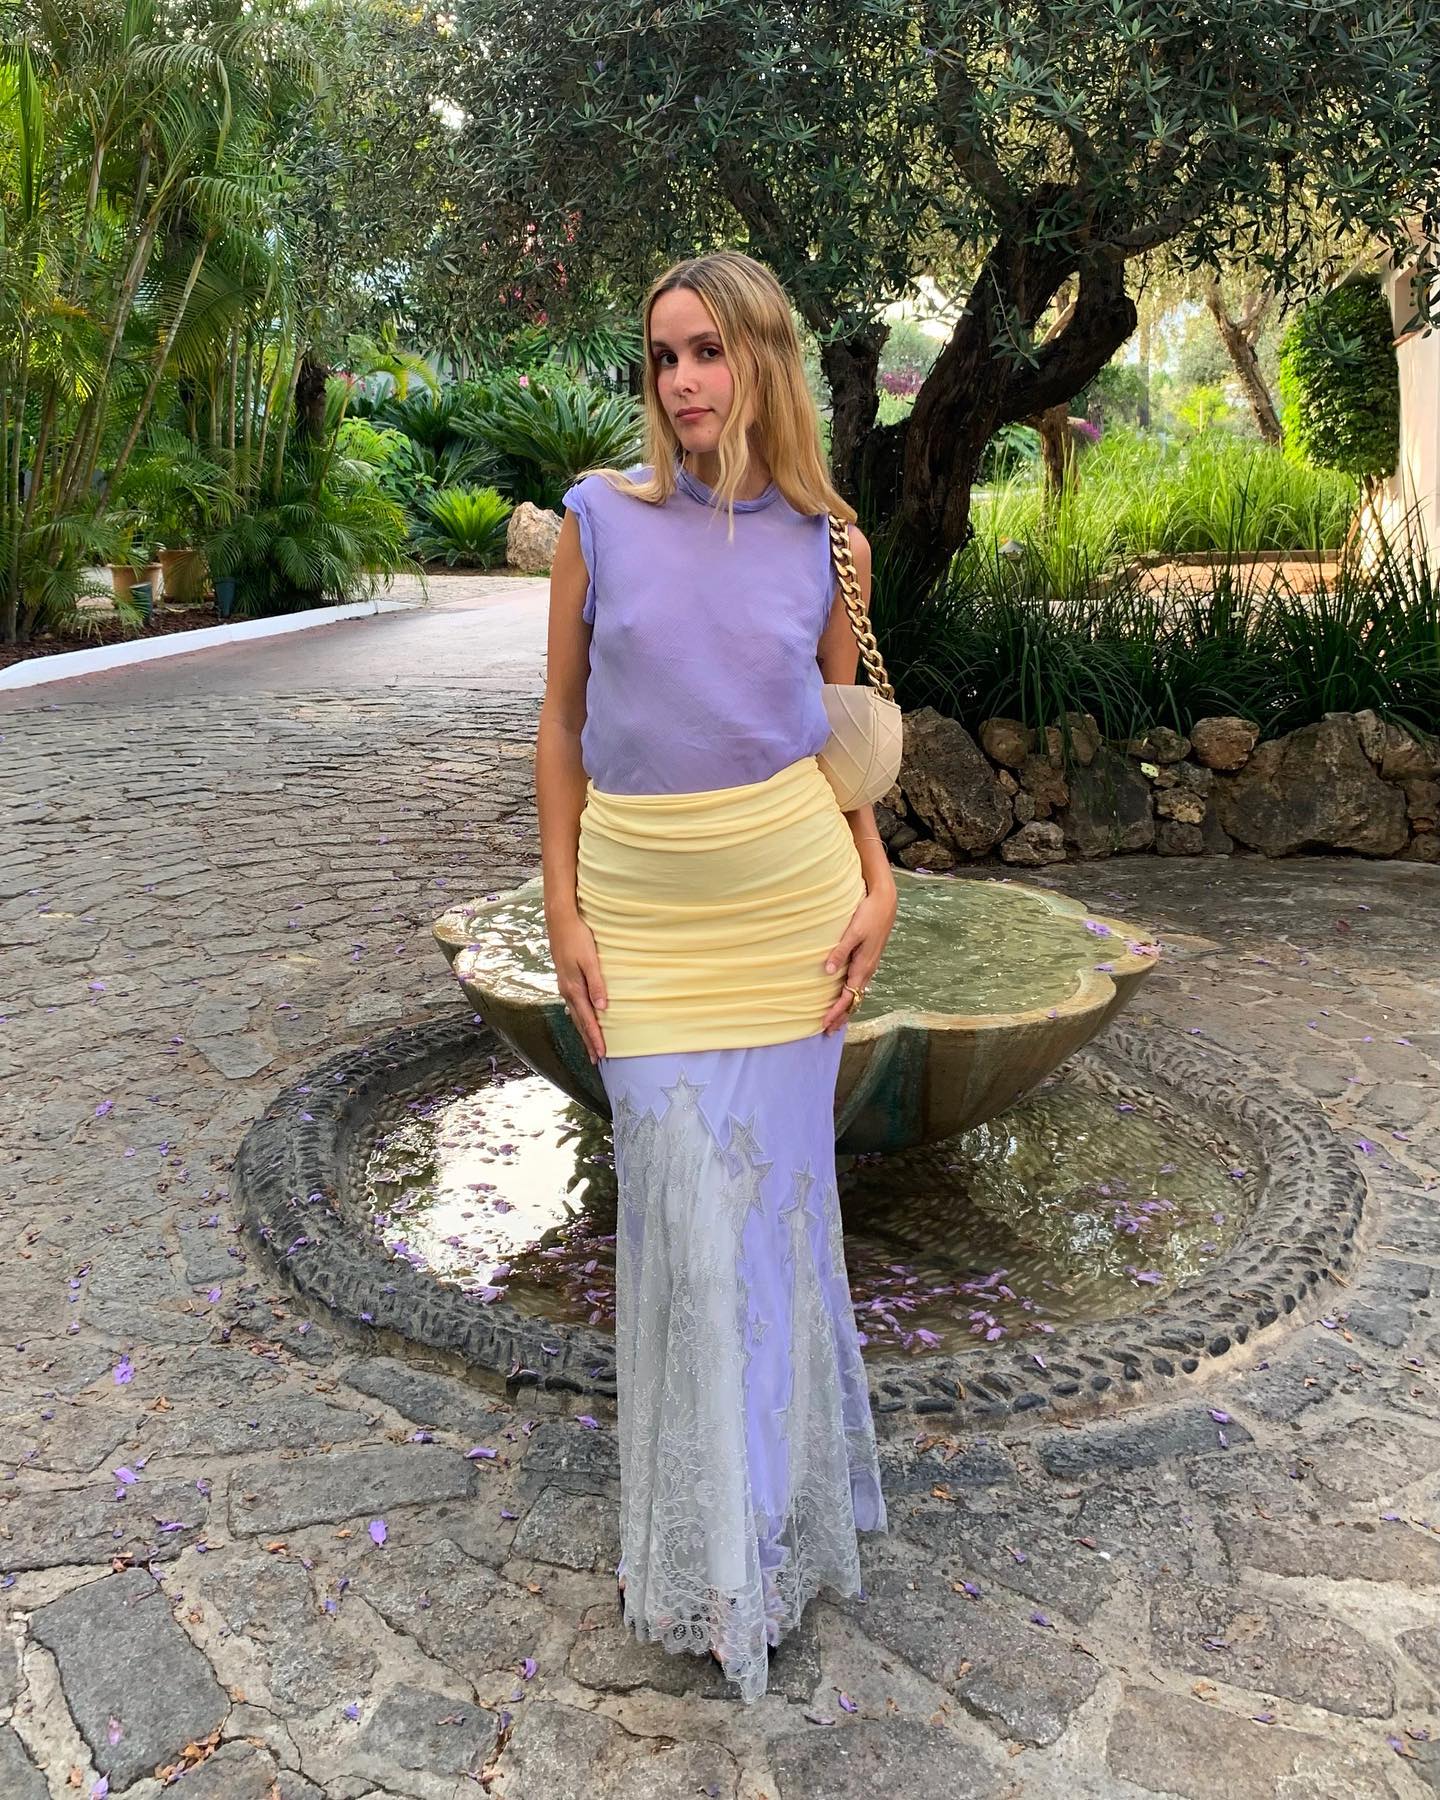 Lucia Cuesta wearing a lavender top and skirt from Tory Burch.